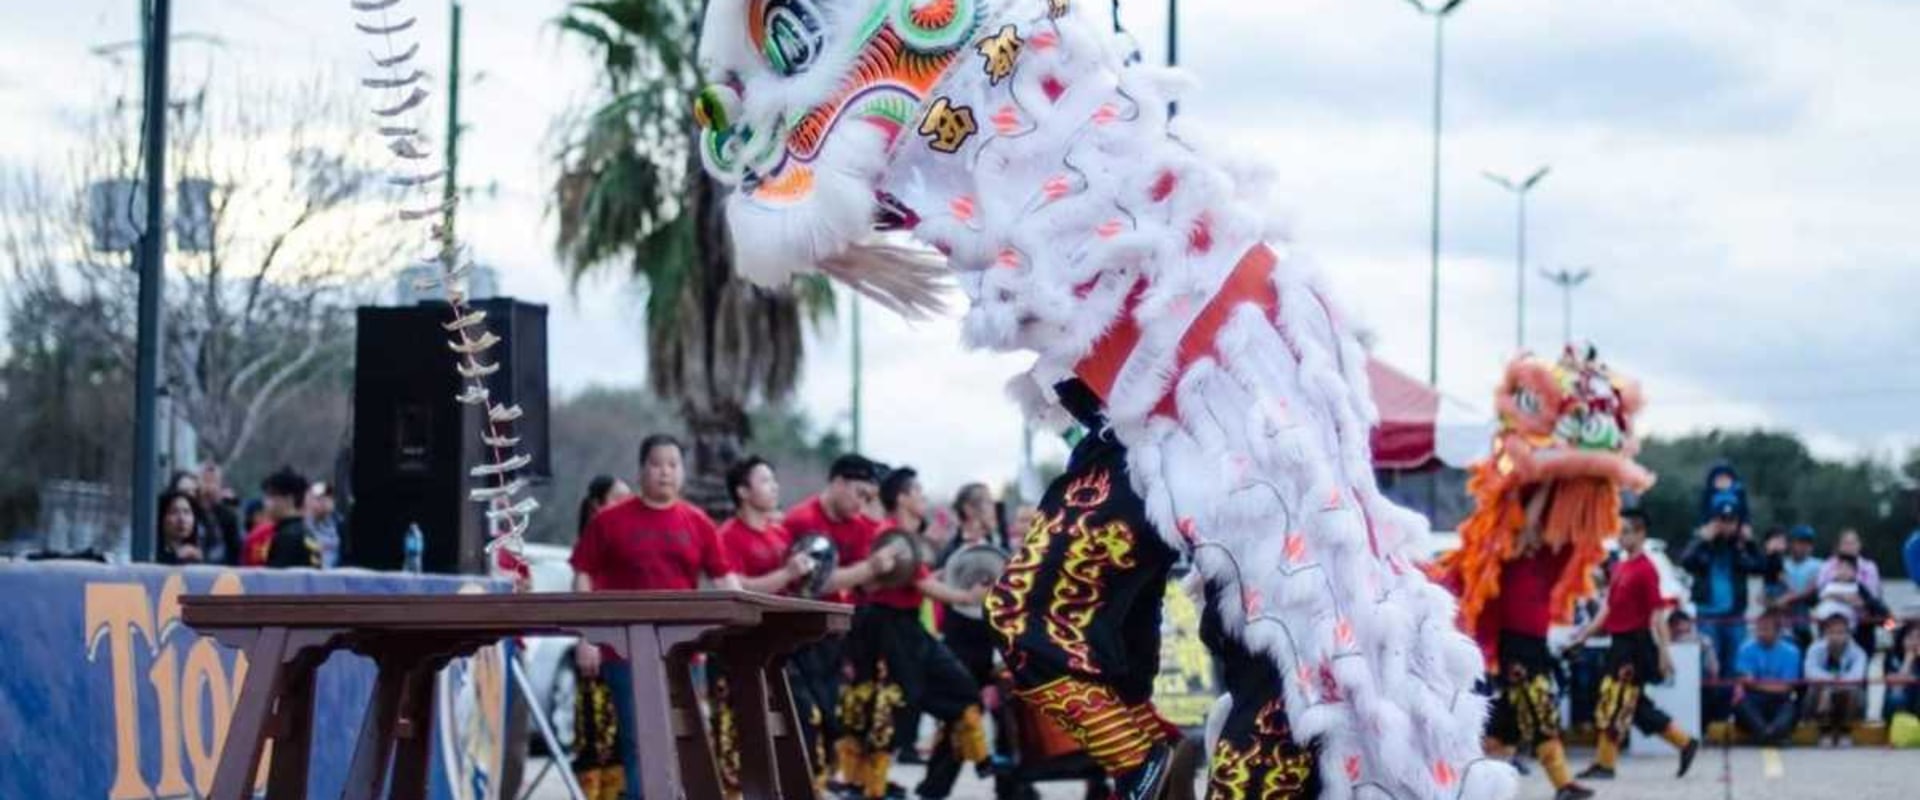 The Vibrant History of Festivals in Harris County, TX